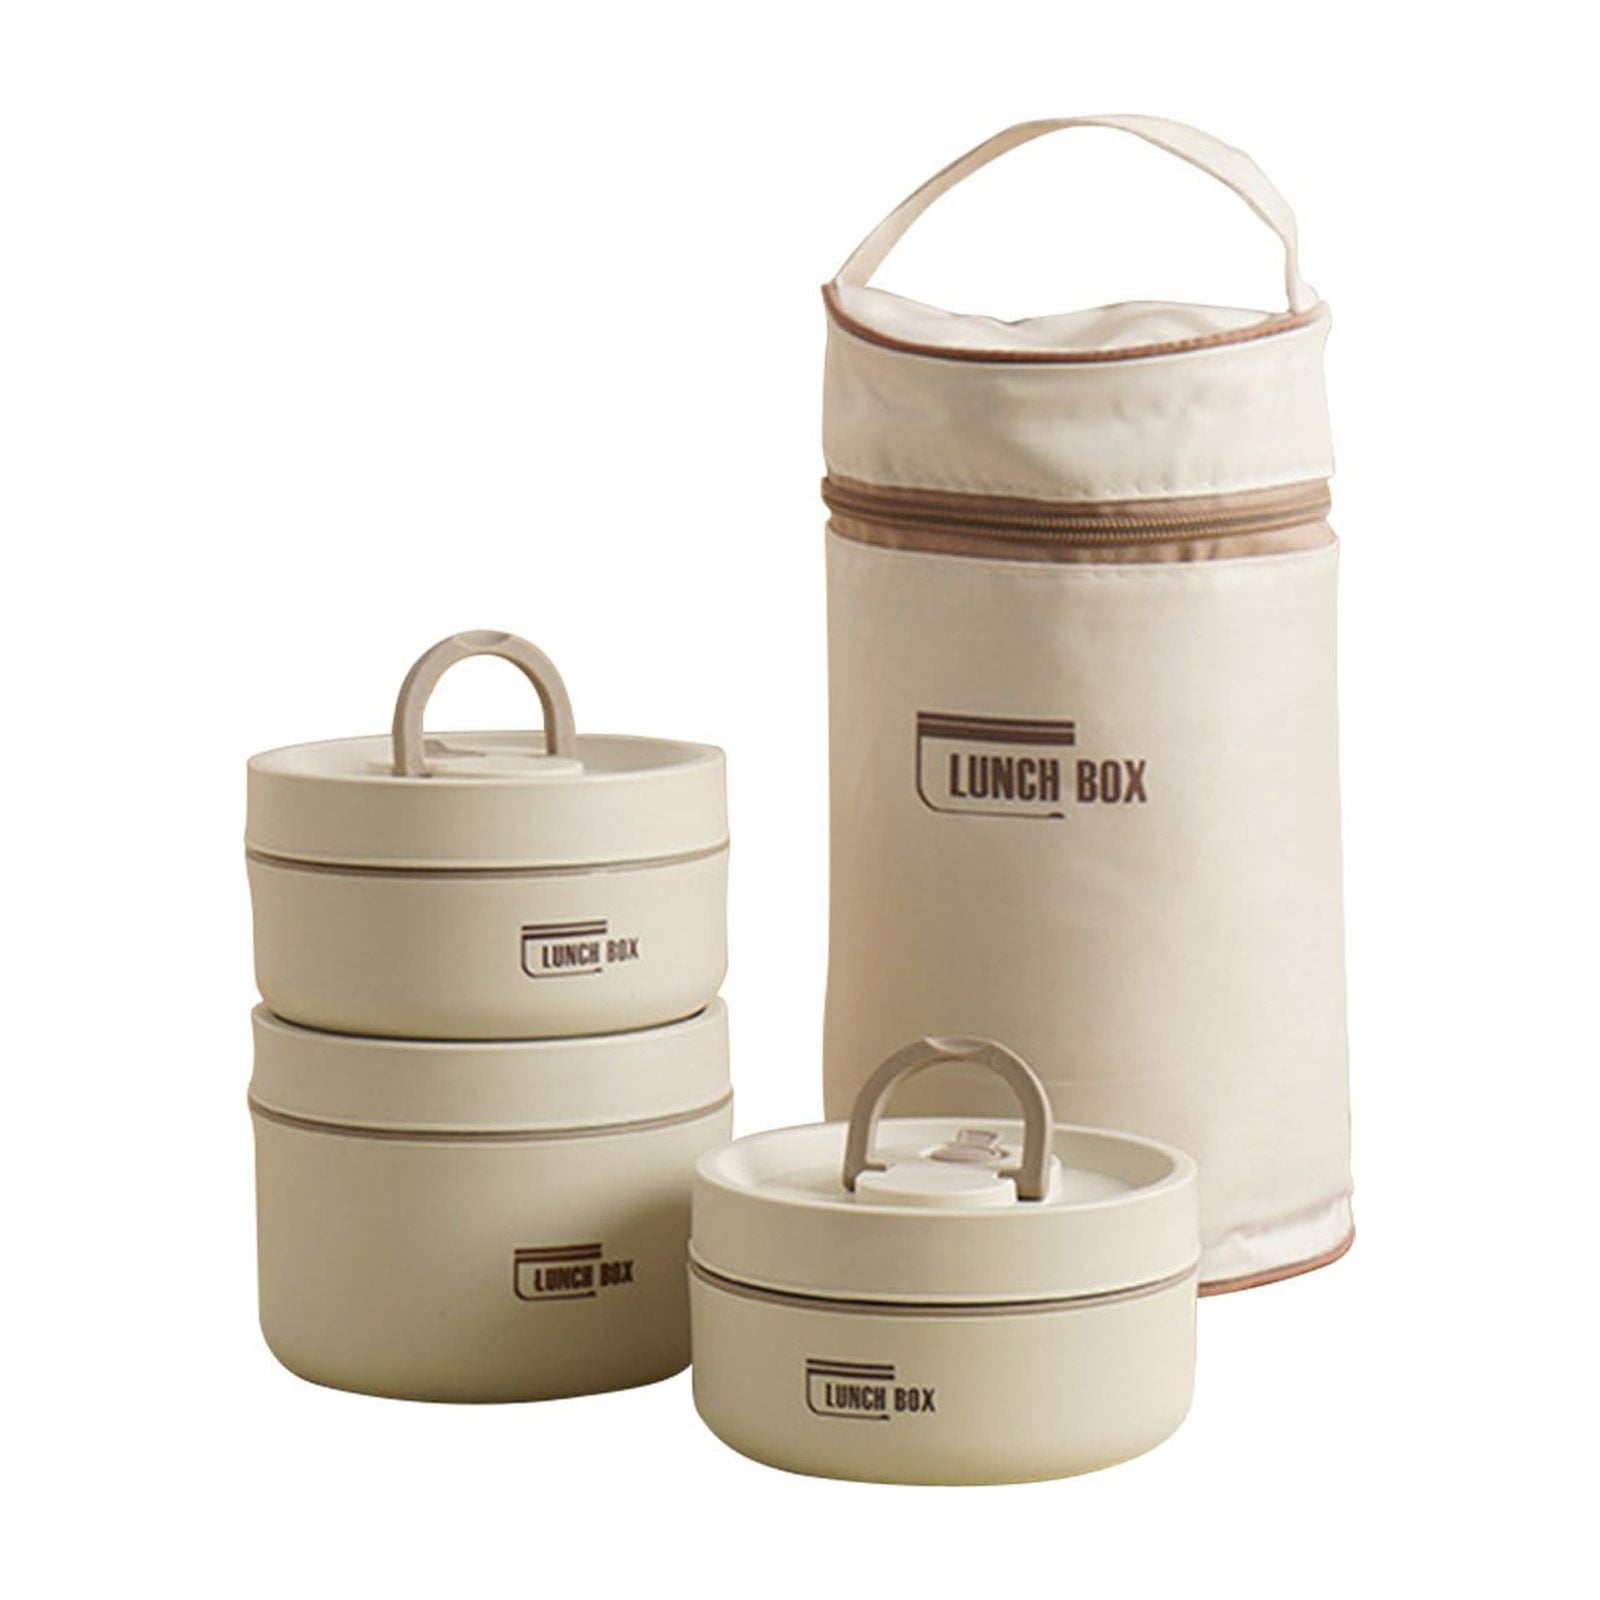 Lunch Box, Portable Insulated Lunch Container Set, Stackable